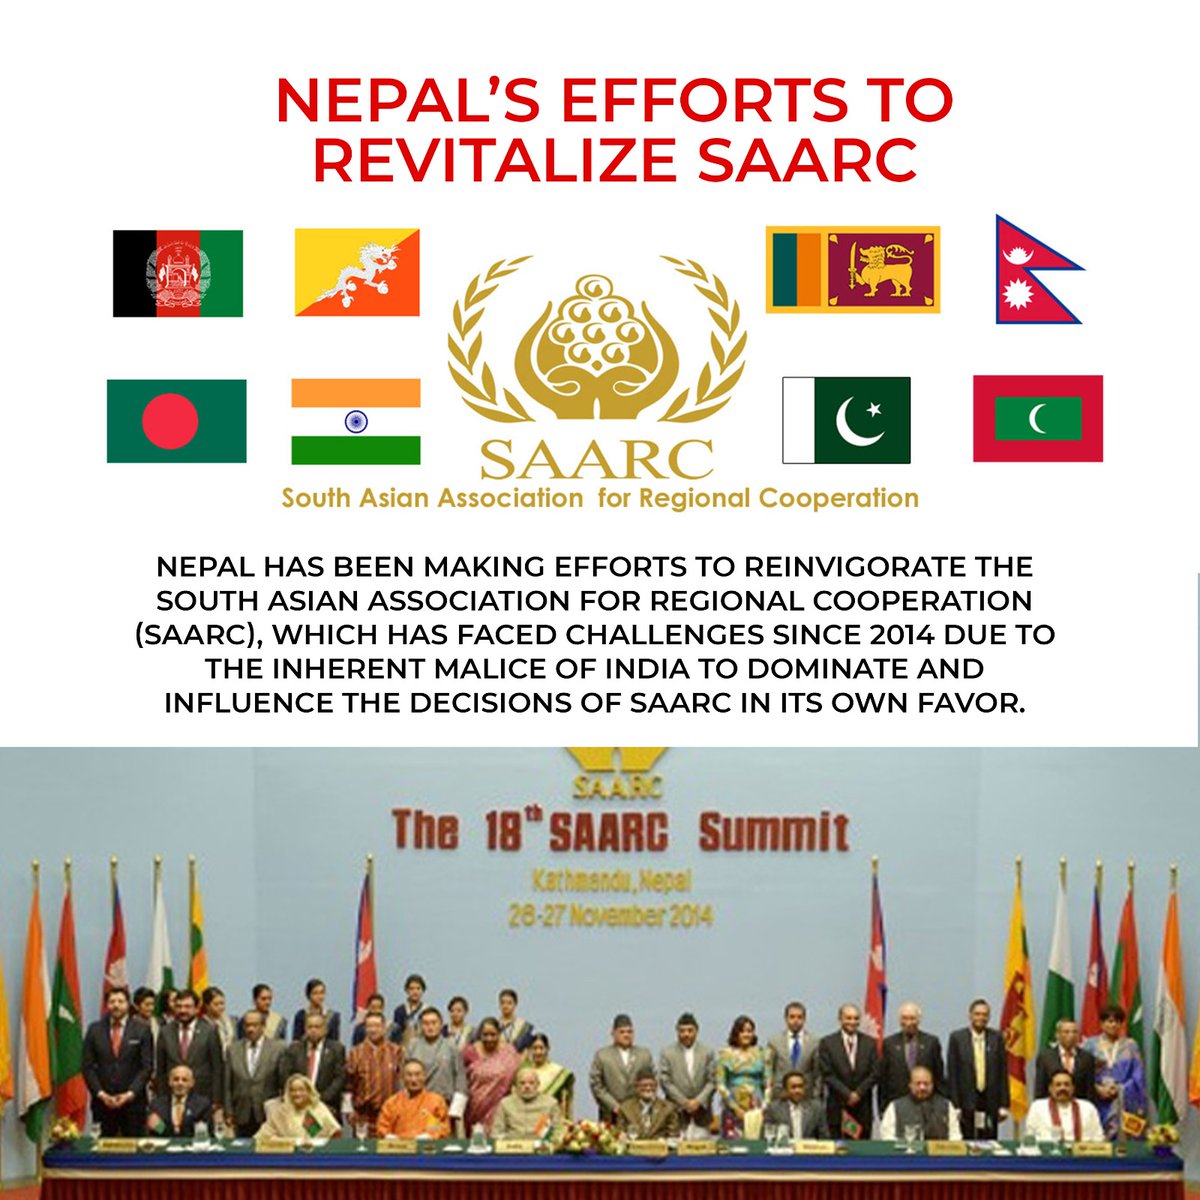 As a founding member of SAARC, Nepal is stepping up efforts to revitalize the organization, countering India's push for alternatives like BIMSTEC. The goal is to renew cooperation among South Asian nations despite ongoing challenges.